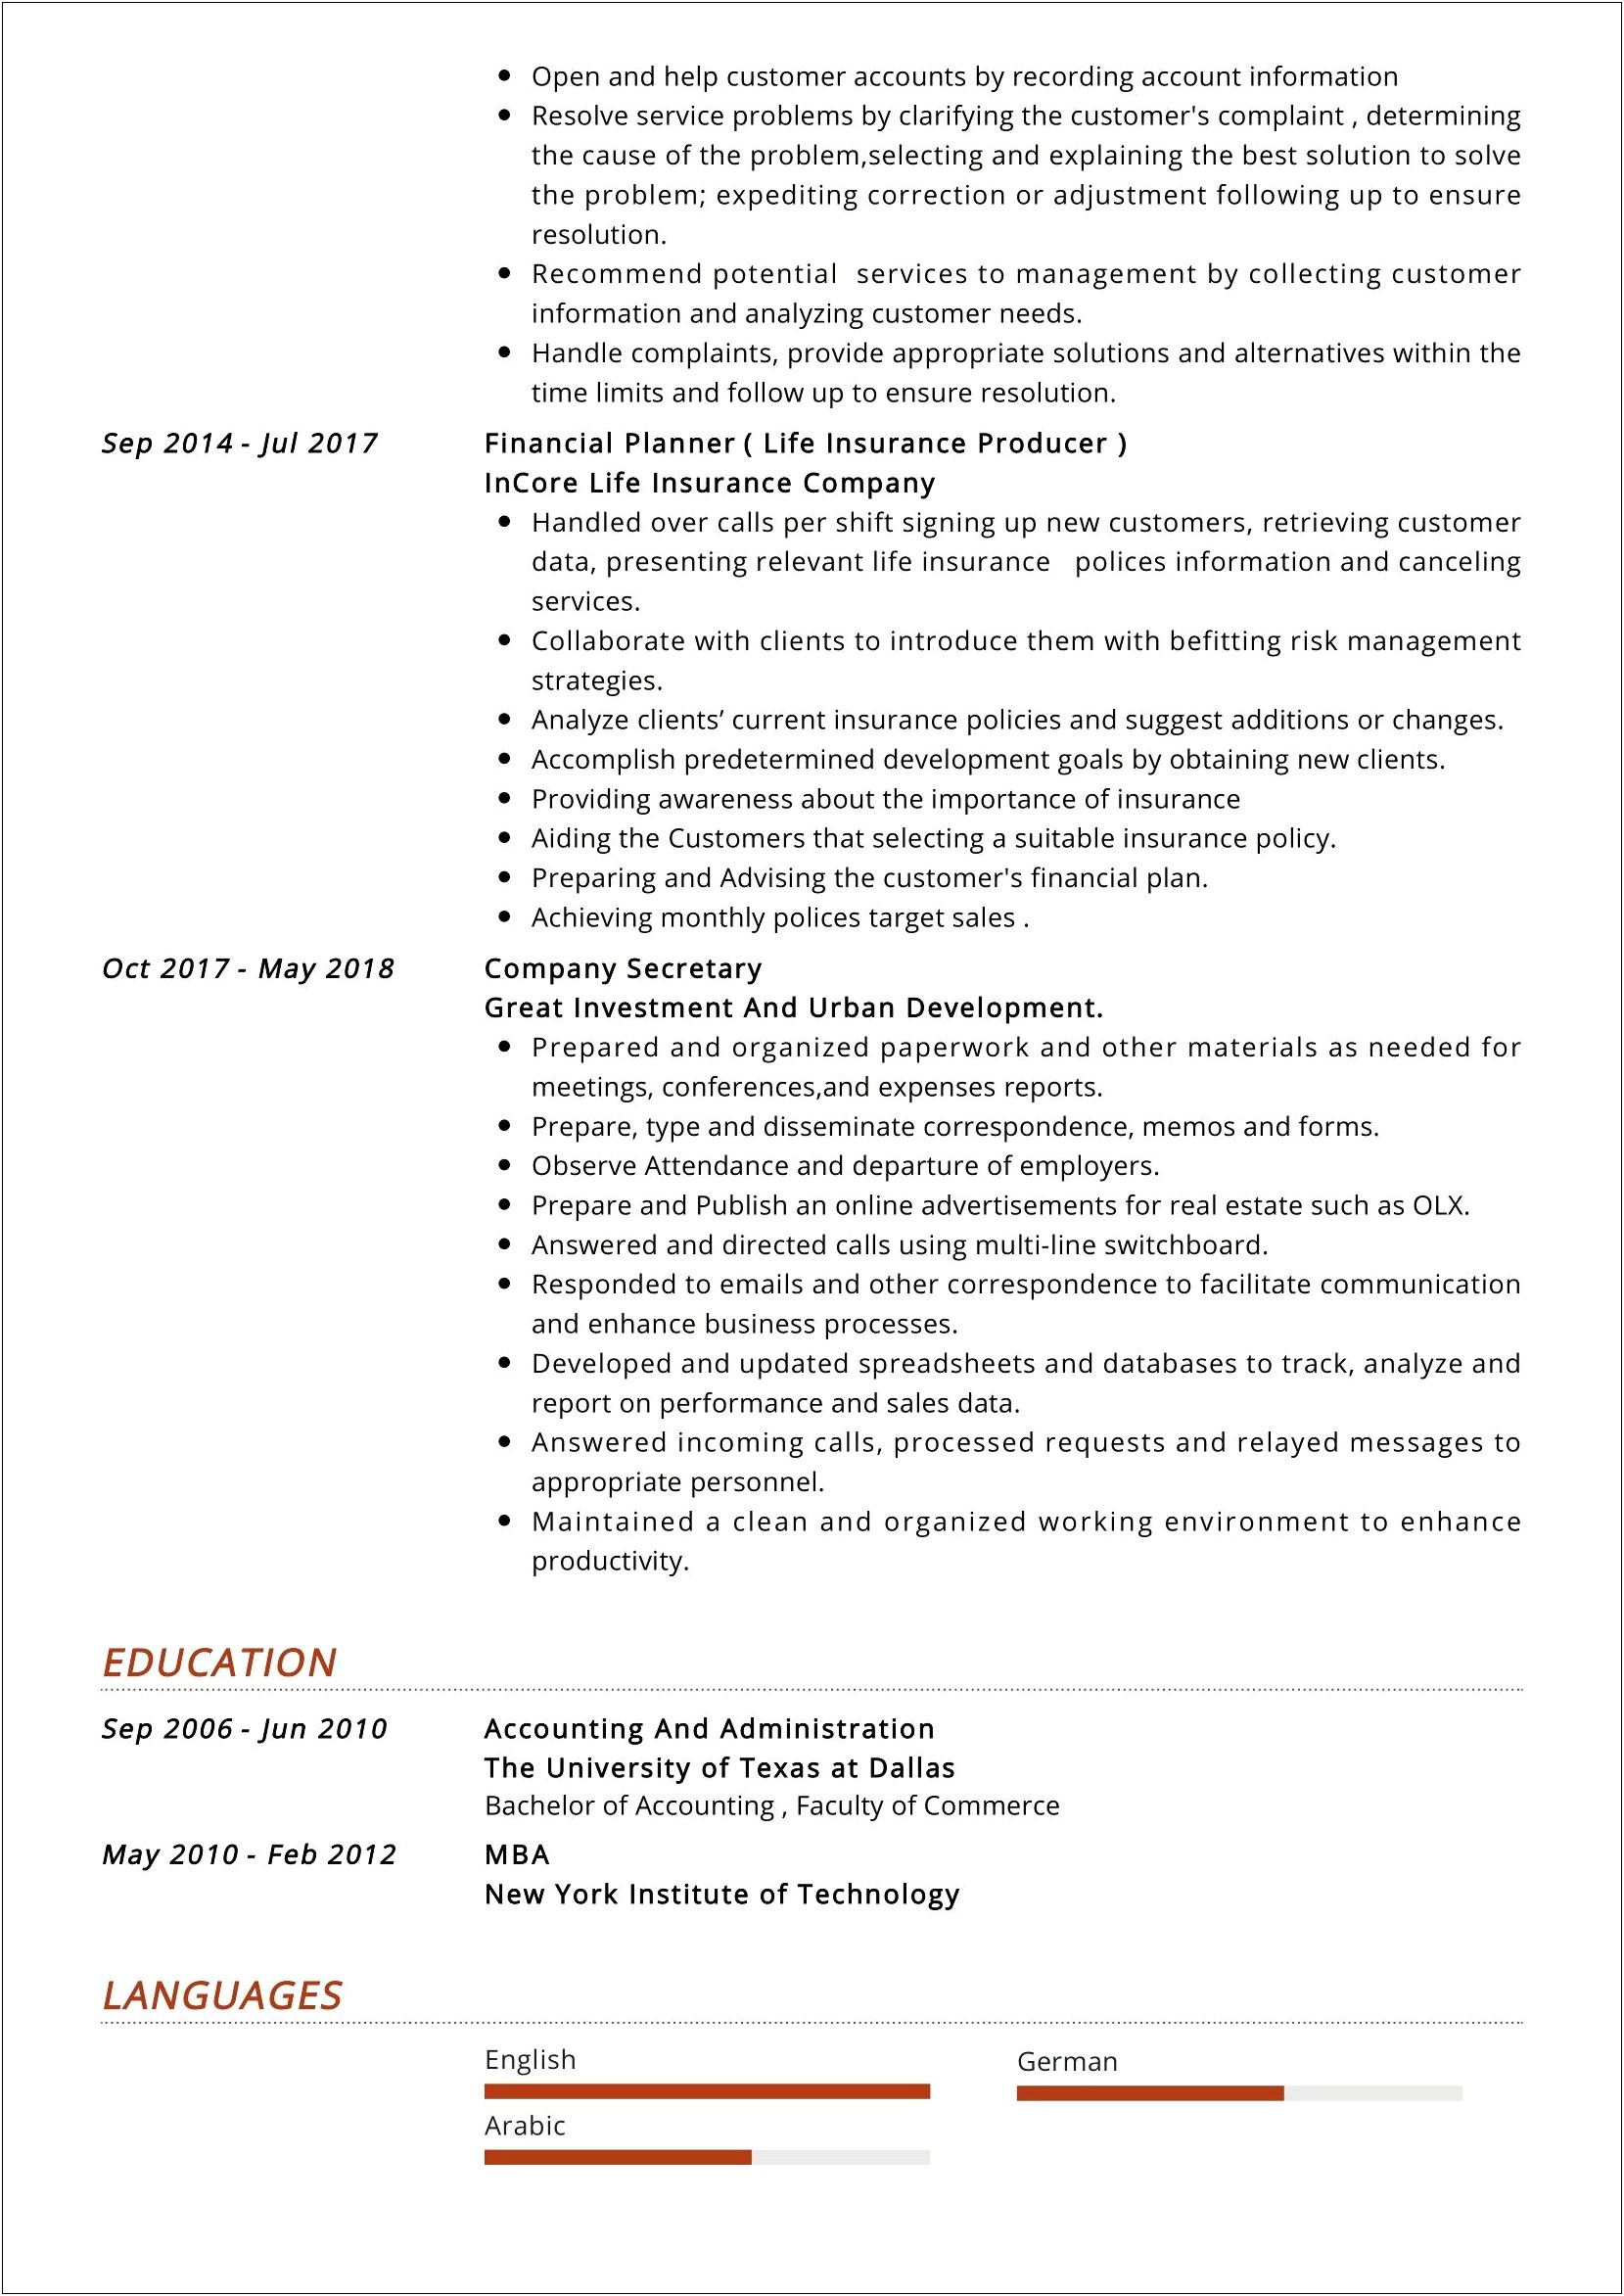 Accountant Resume Objective No Experience